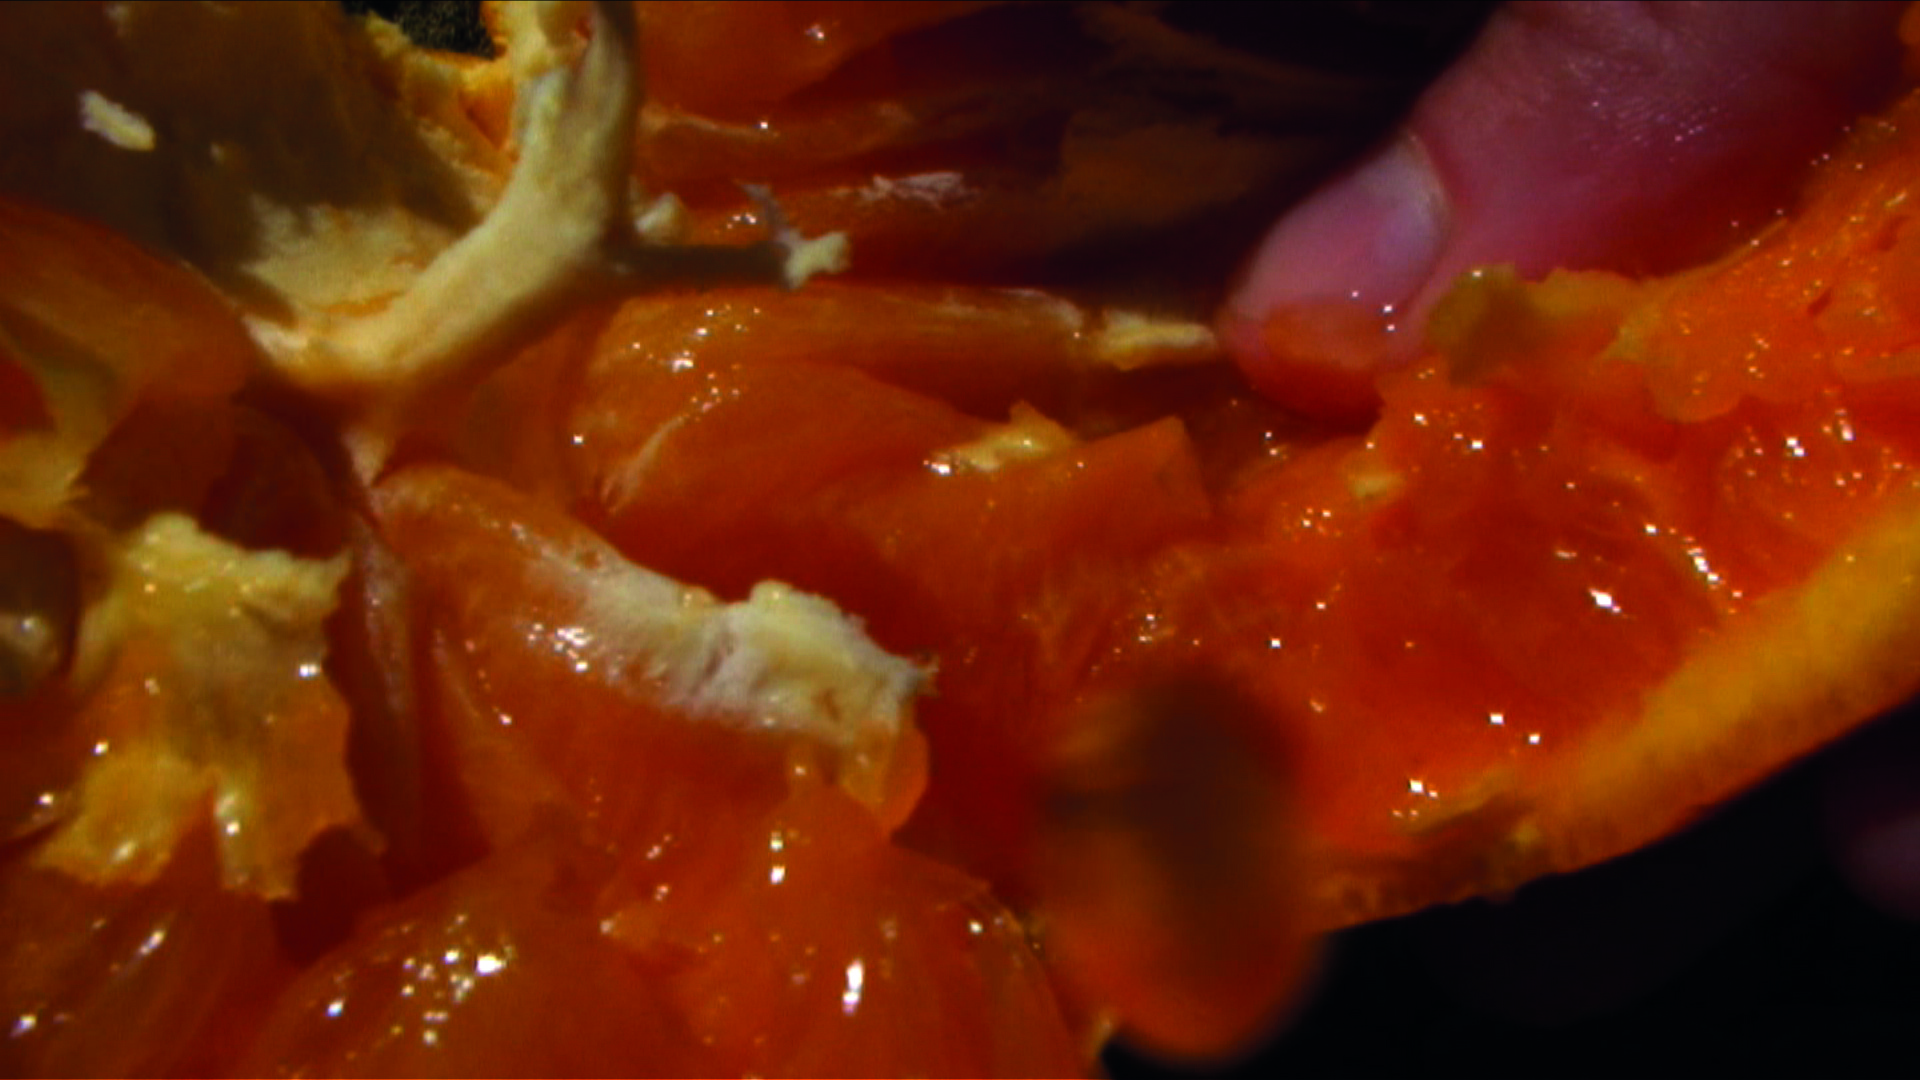  Laure Prouvost,  Swallow  (still), 2013. Courtesy of the artist. A still from the film, showing a very close-up image of the flesh of a very juicy, pulpy orange, being pulled apart. 